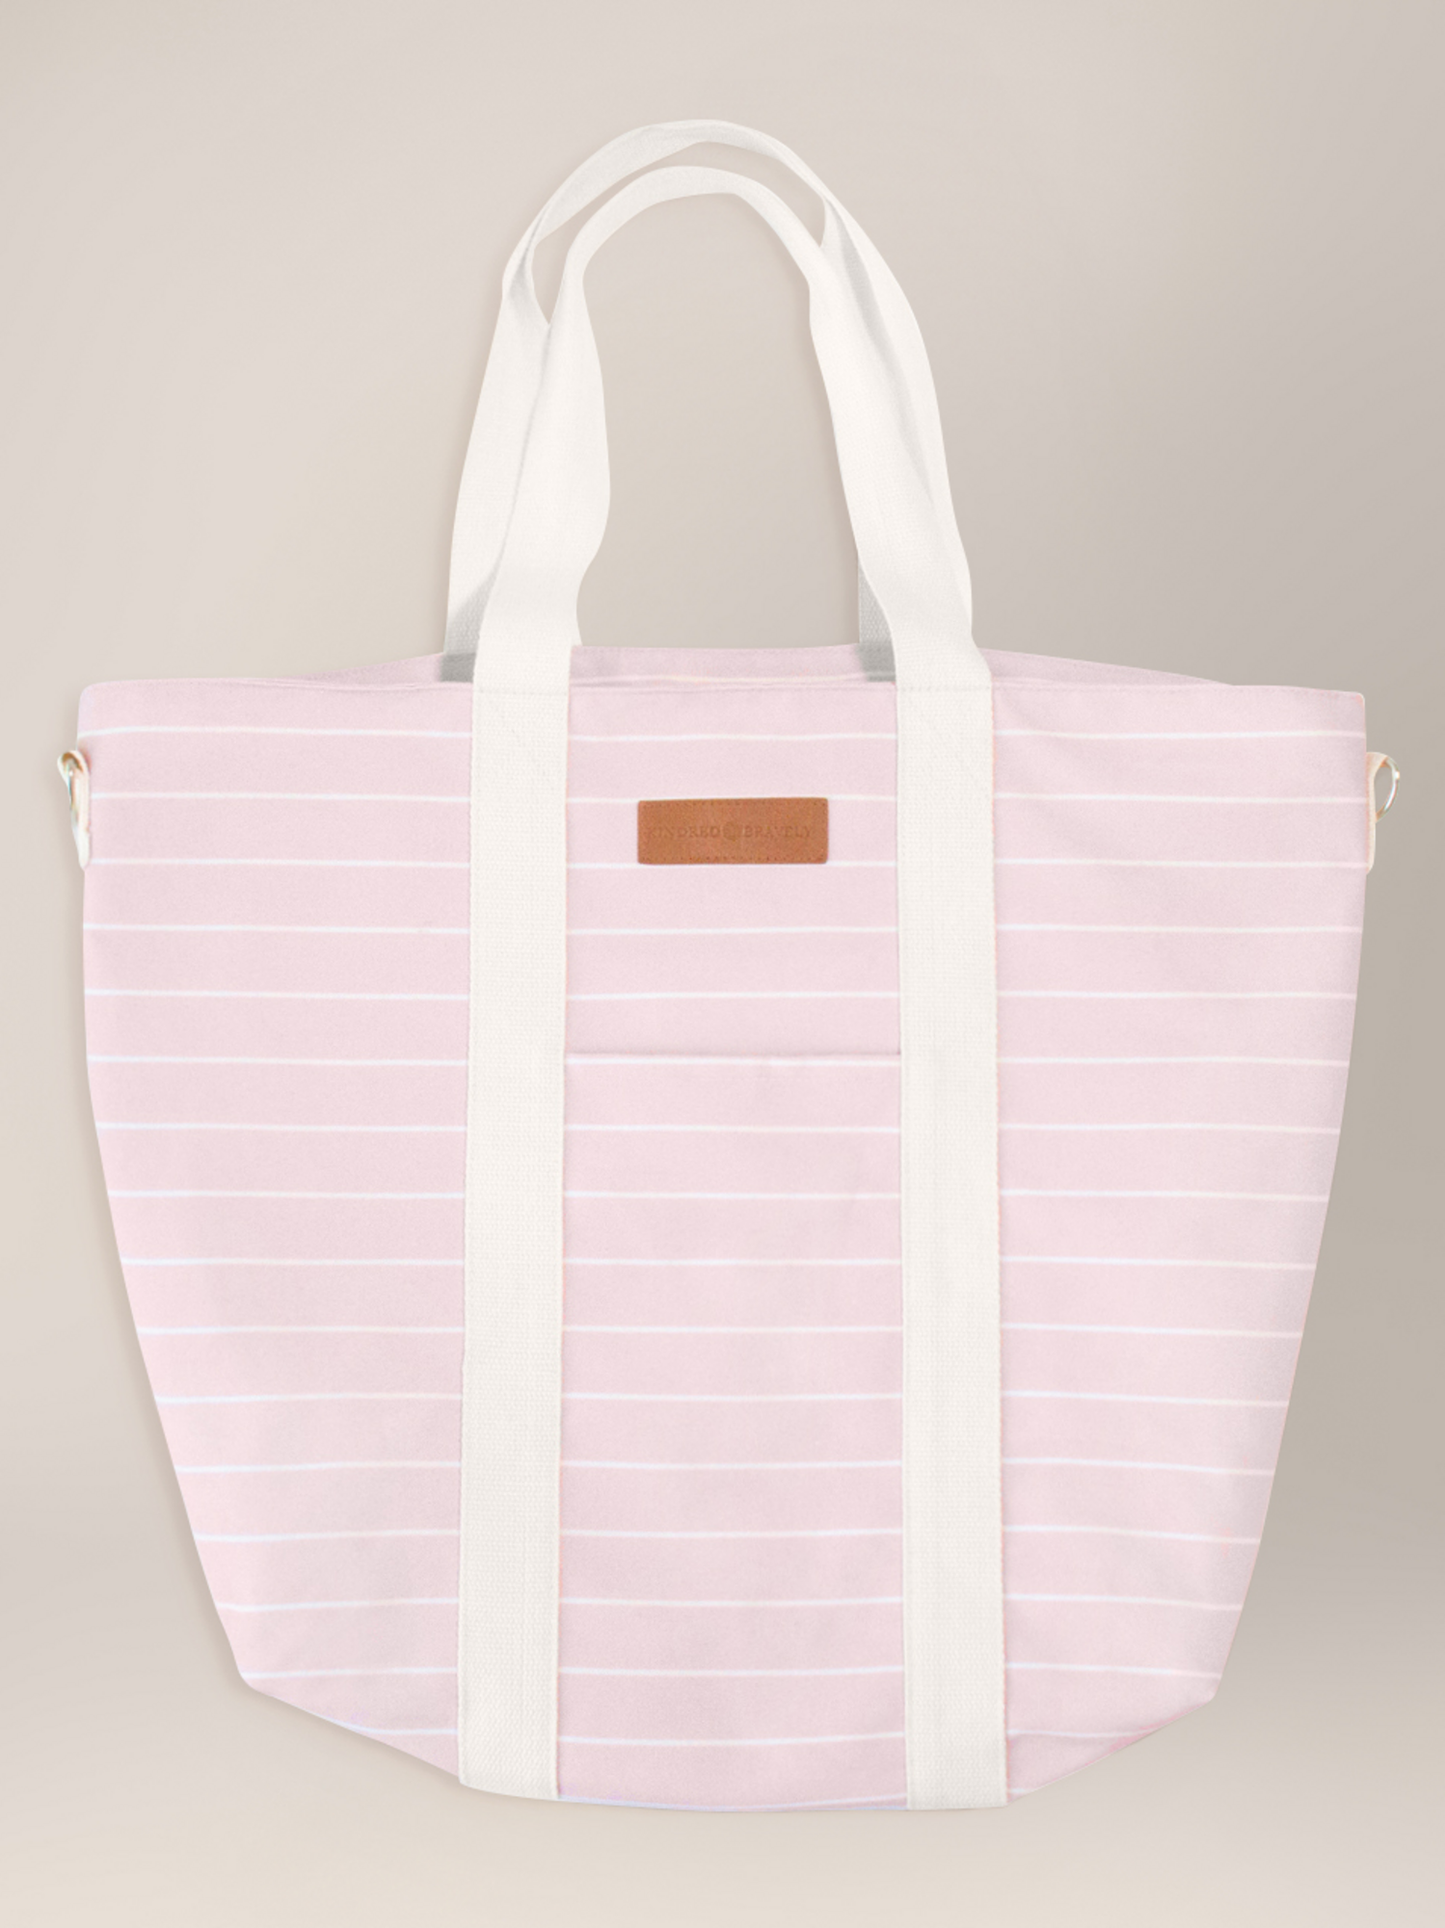 Flat lay of the Florence Tote in Pink & White Stripe against a beige background.